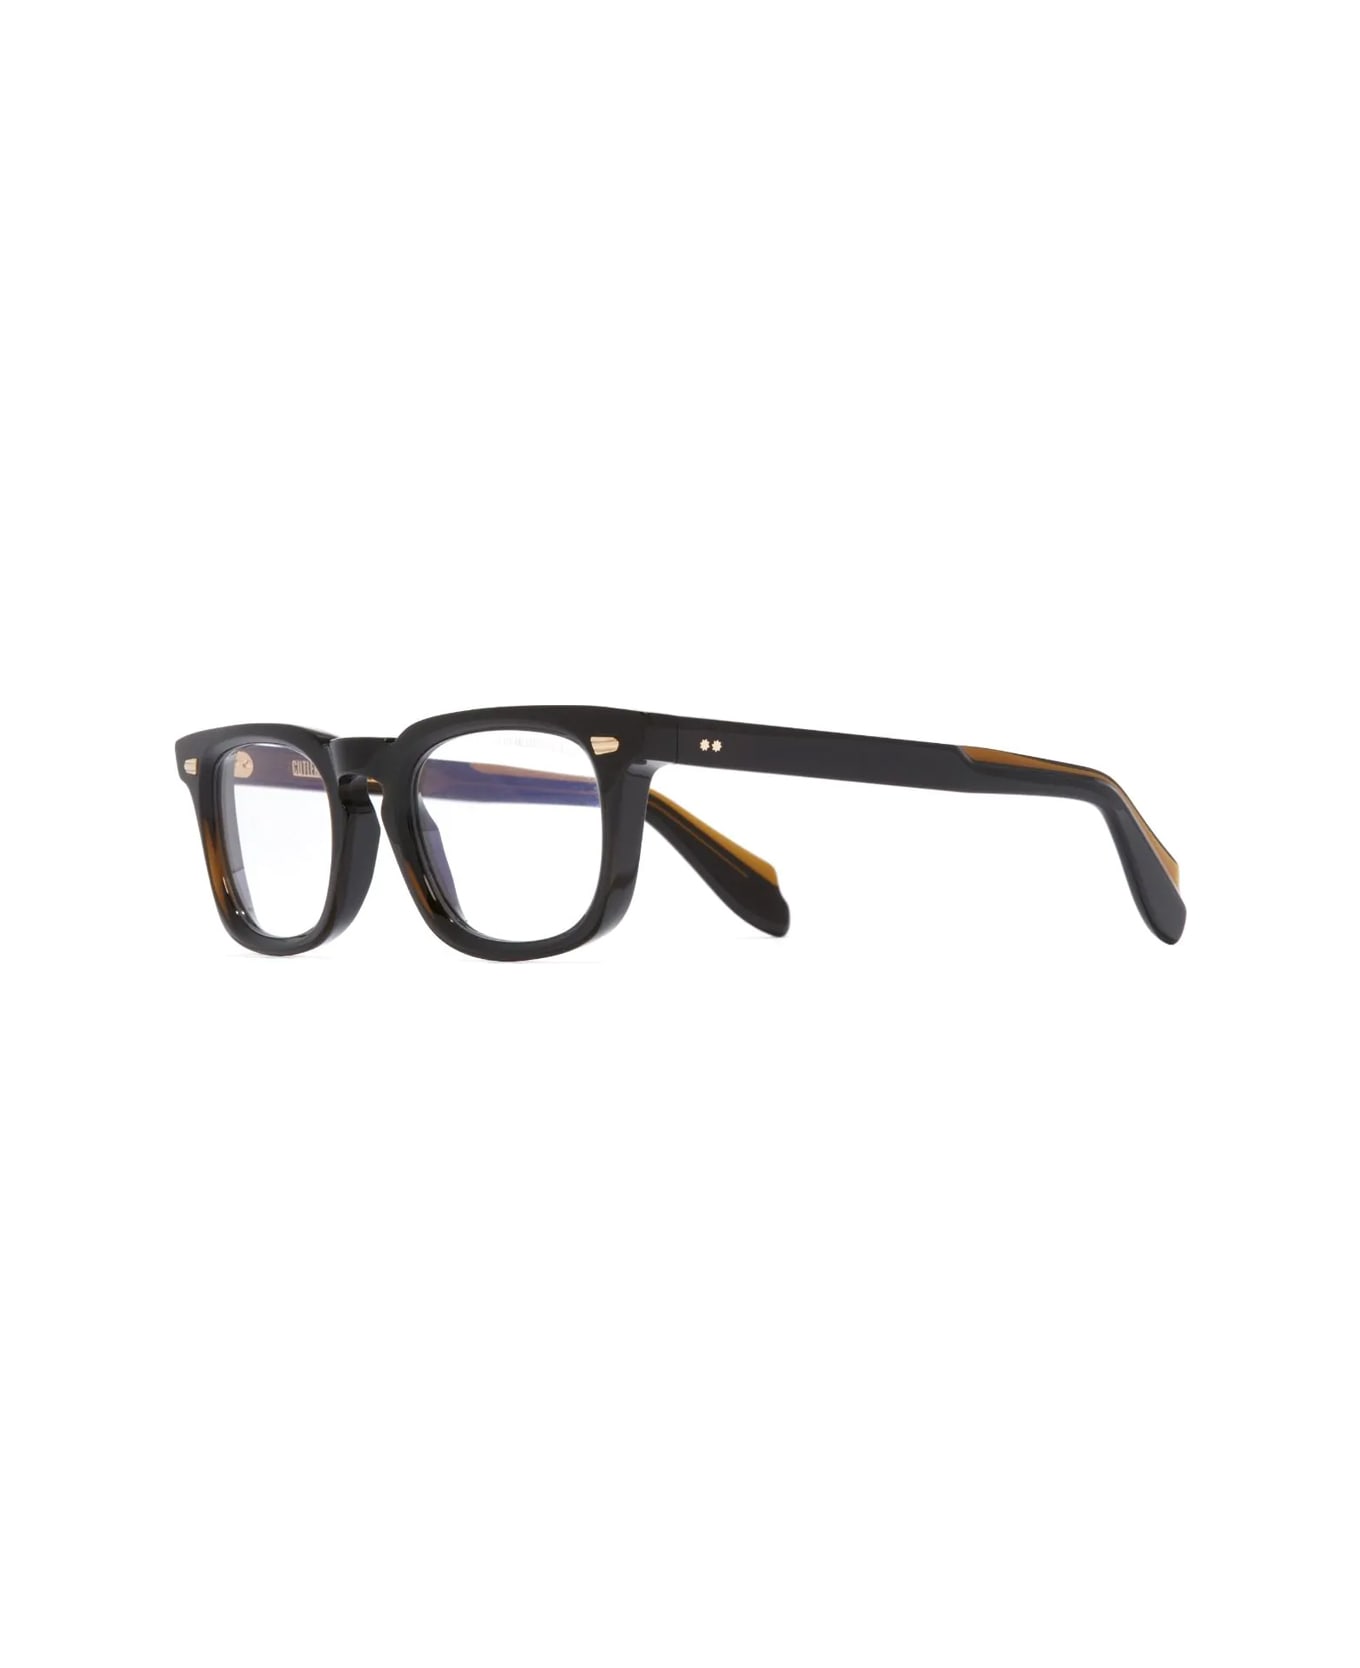 Cutler and Gross 1406 01 Glasses - Nero